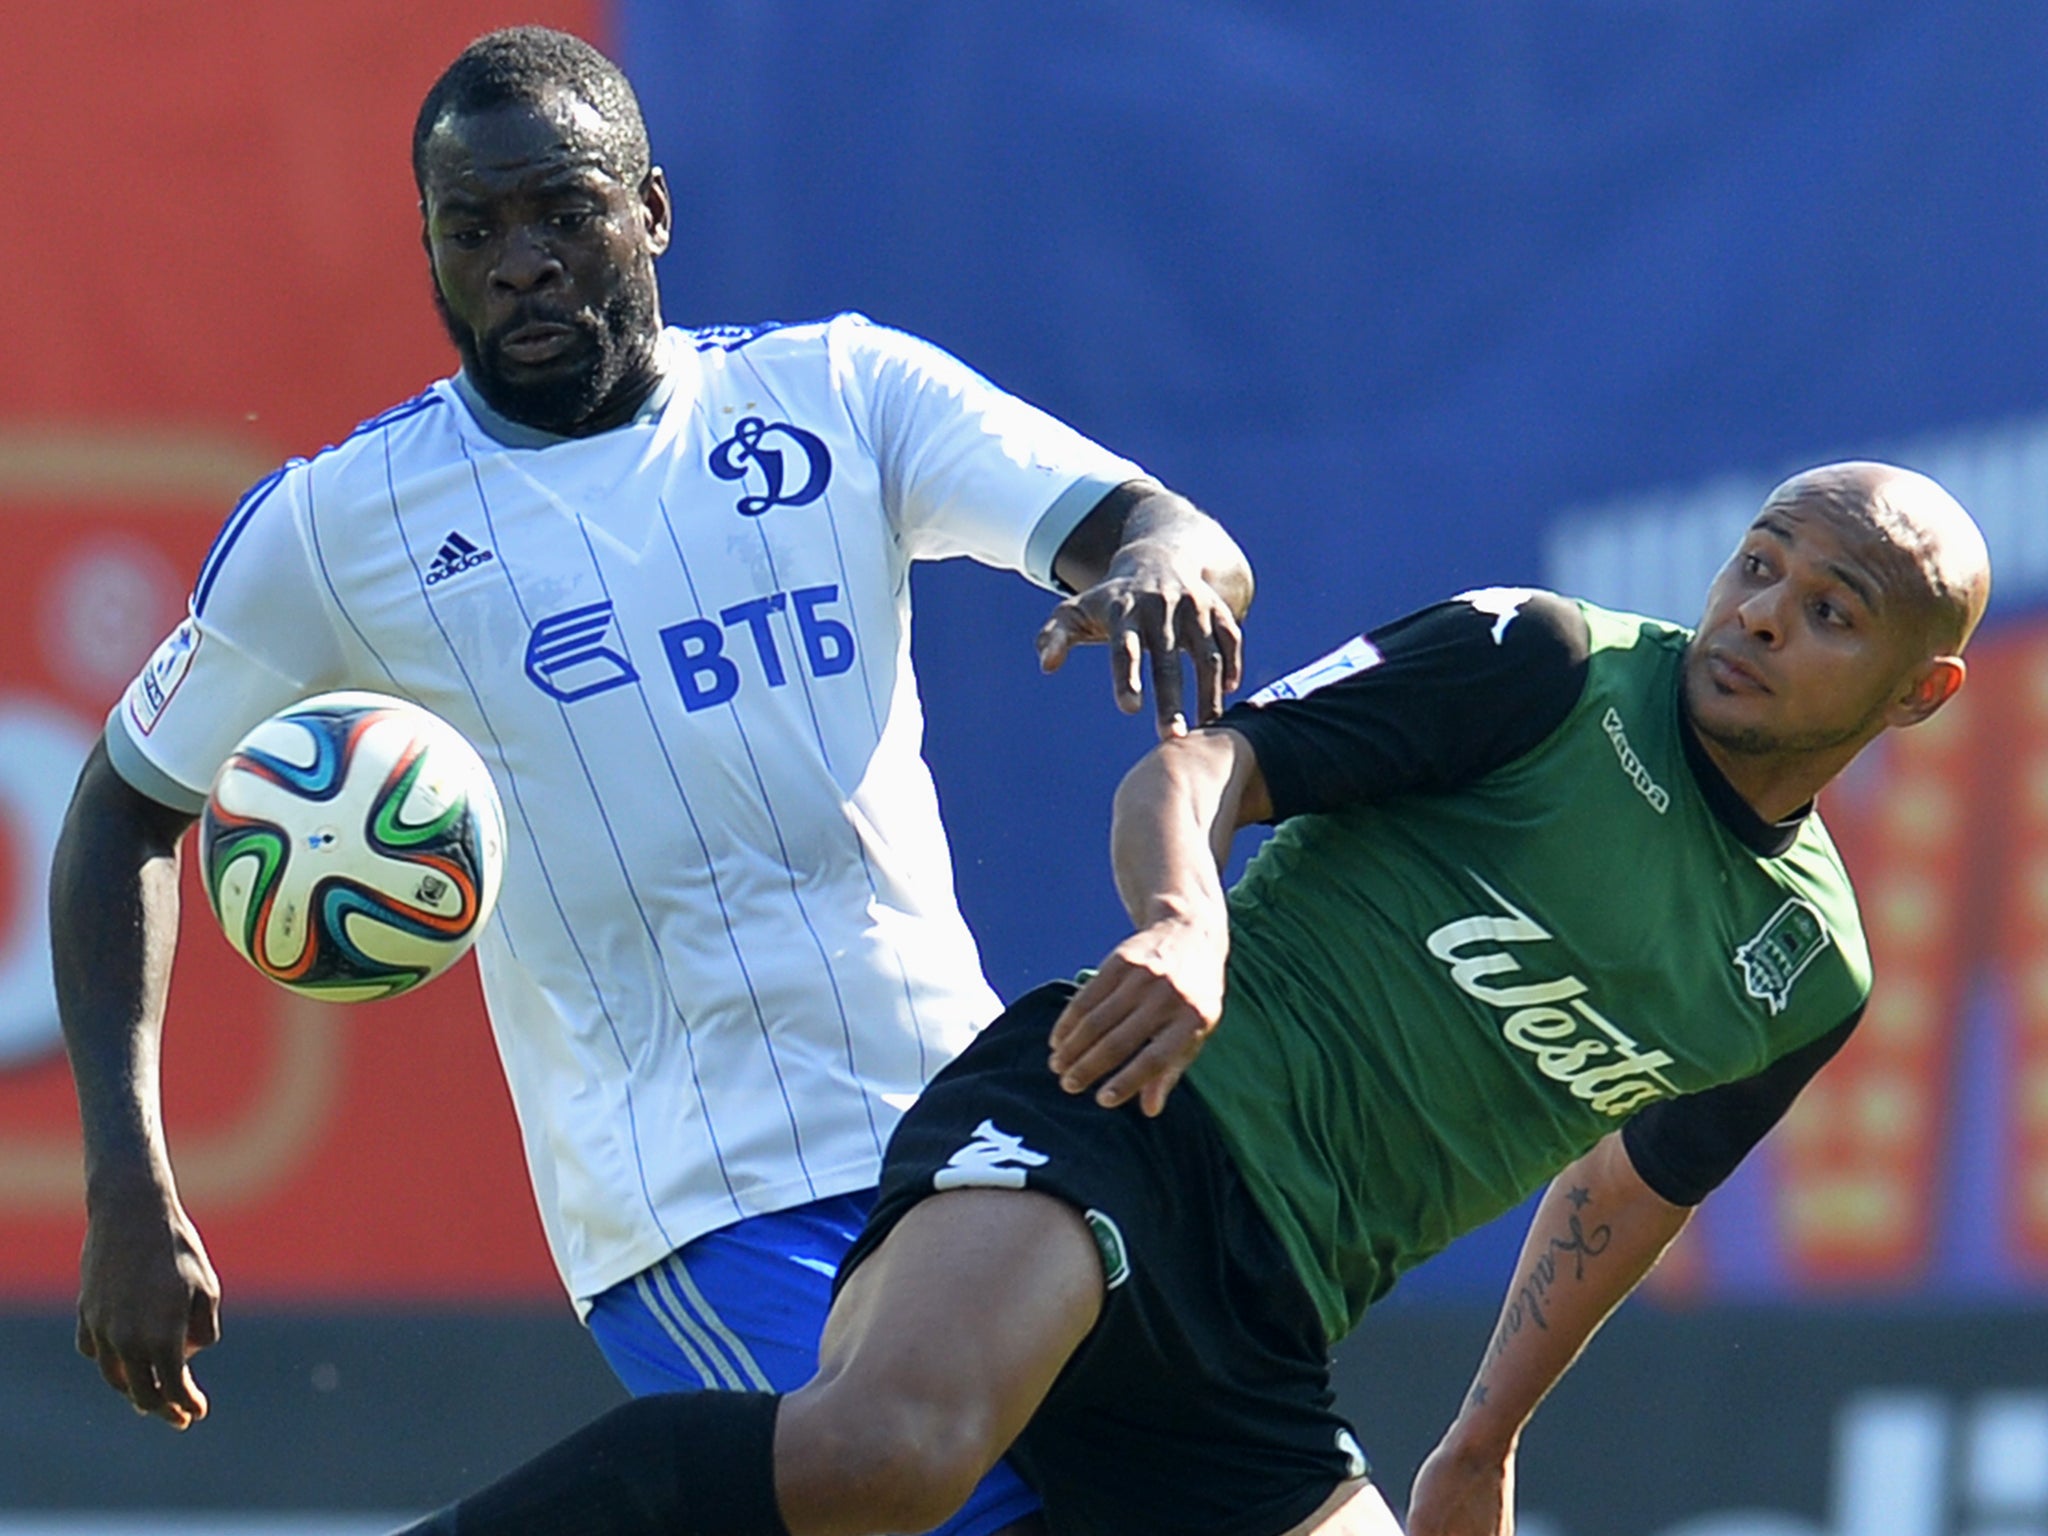 Dynamo Moscow defender Christopher Samba was fined for responding to racist abuse with a one-fingered gesture